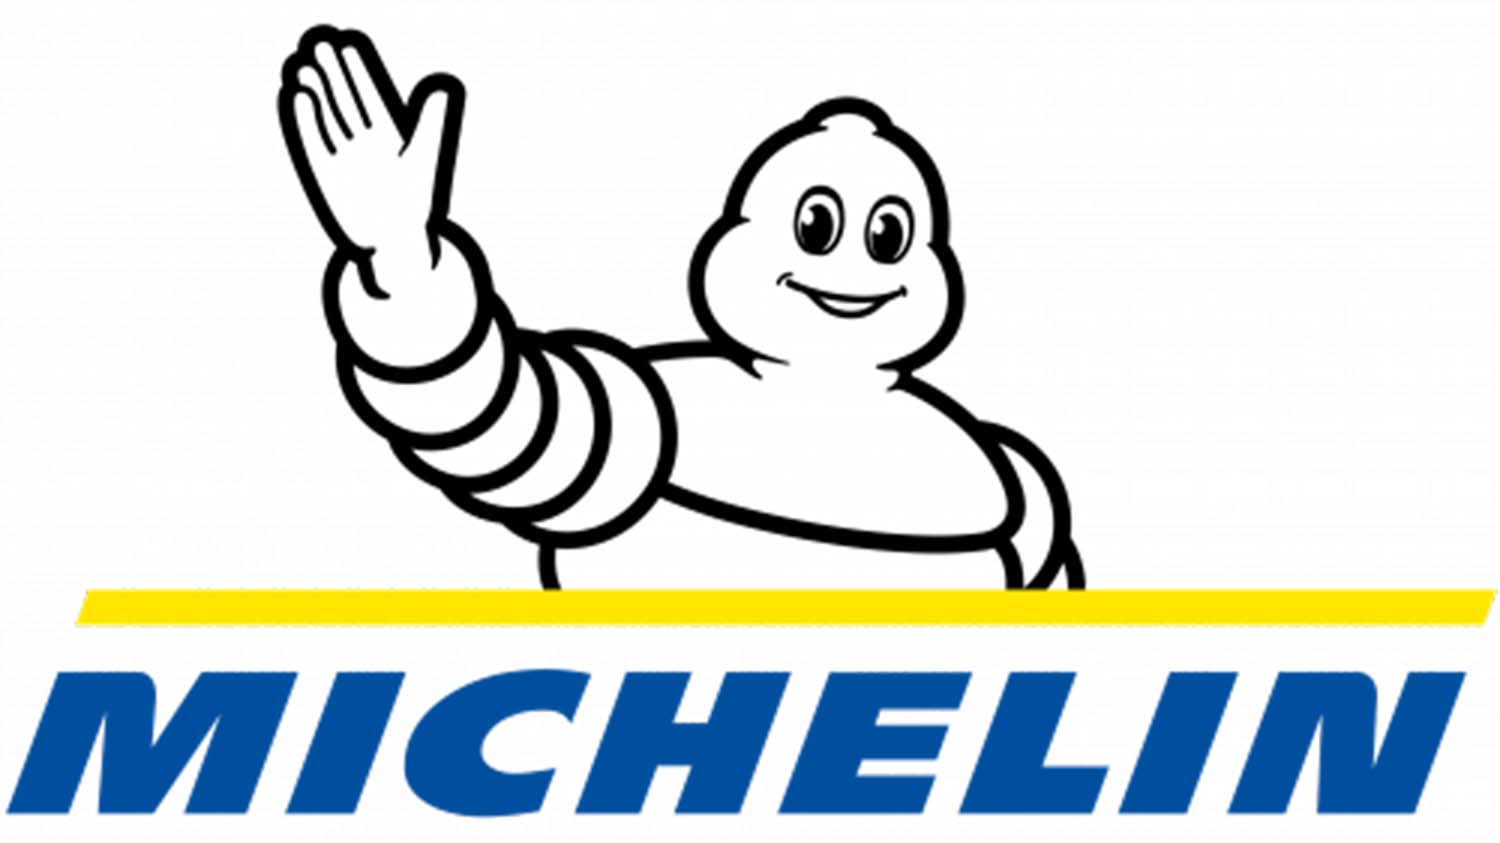 In 2050 – Michelin Tires Will Be 100% Sustainable